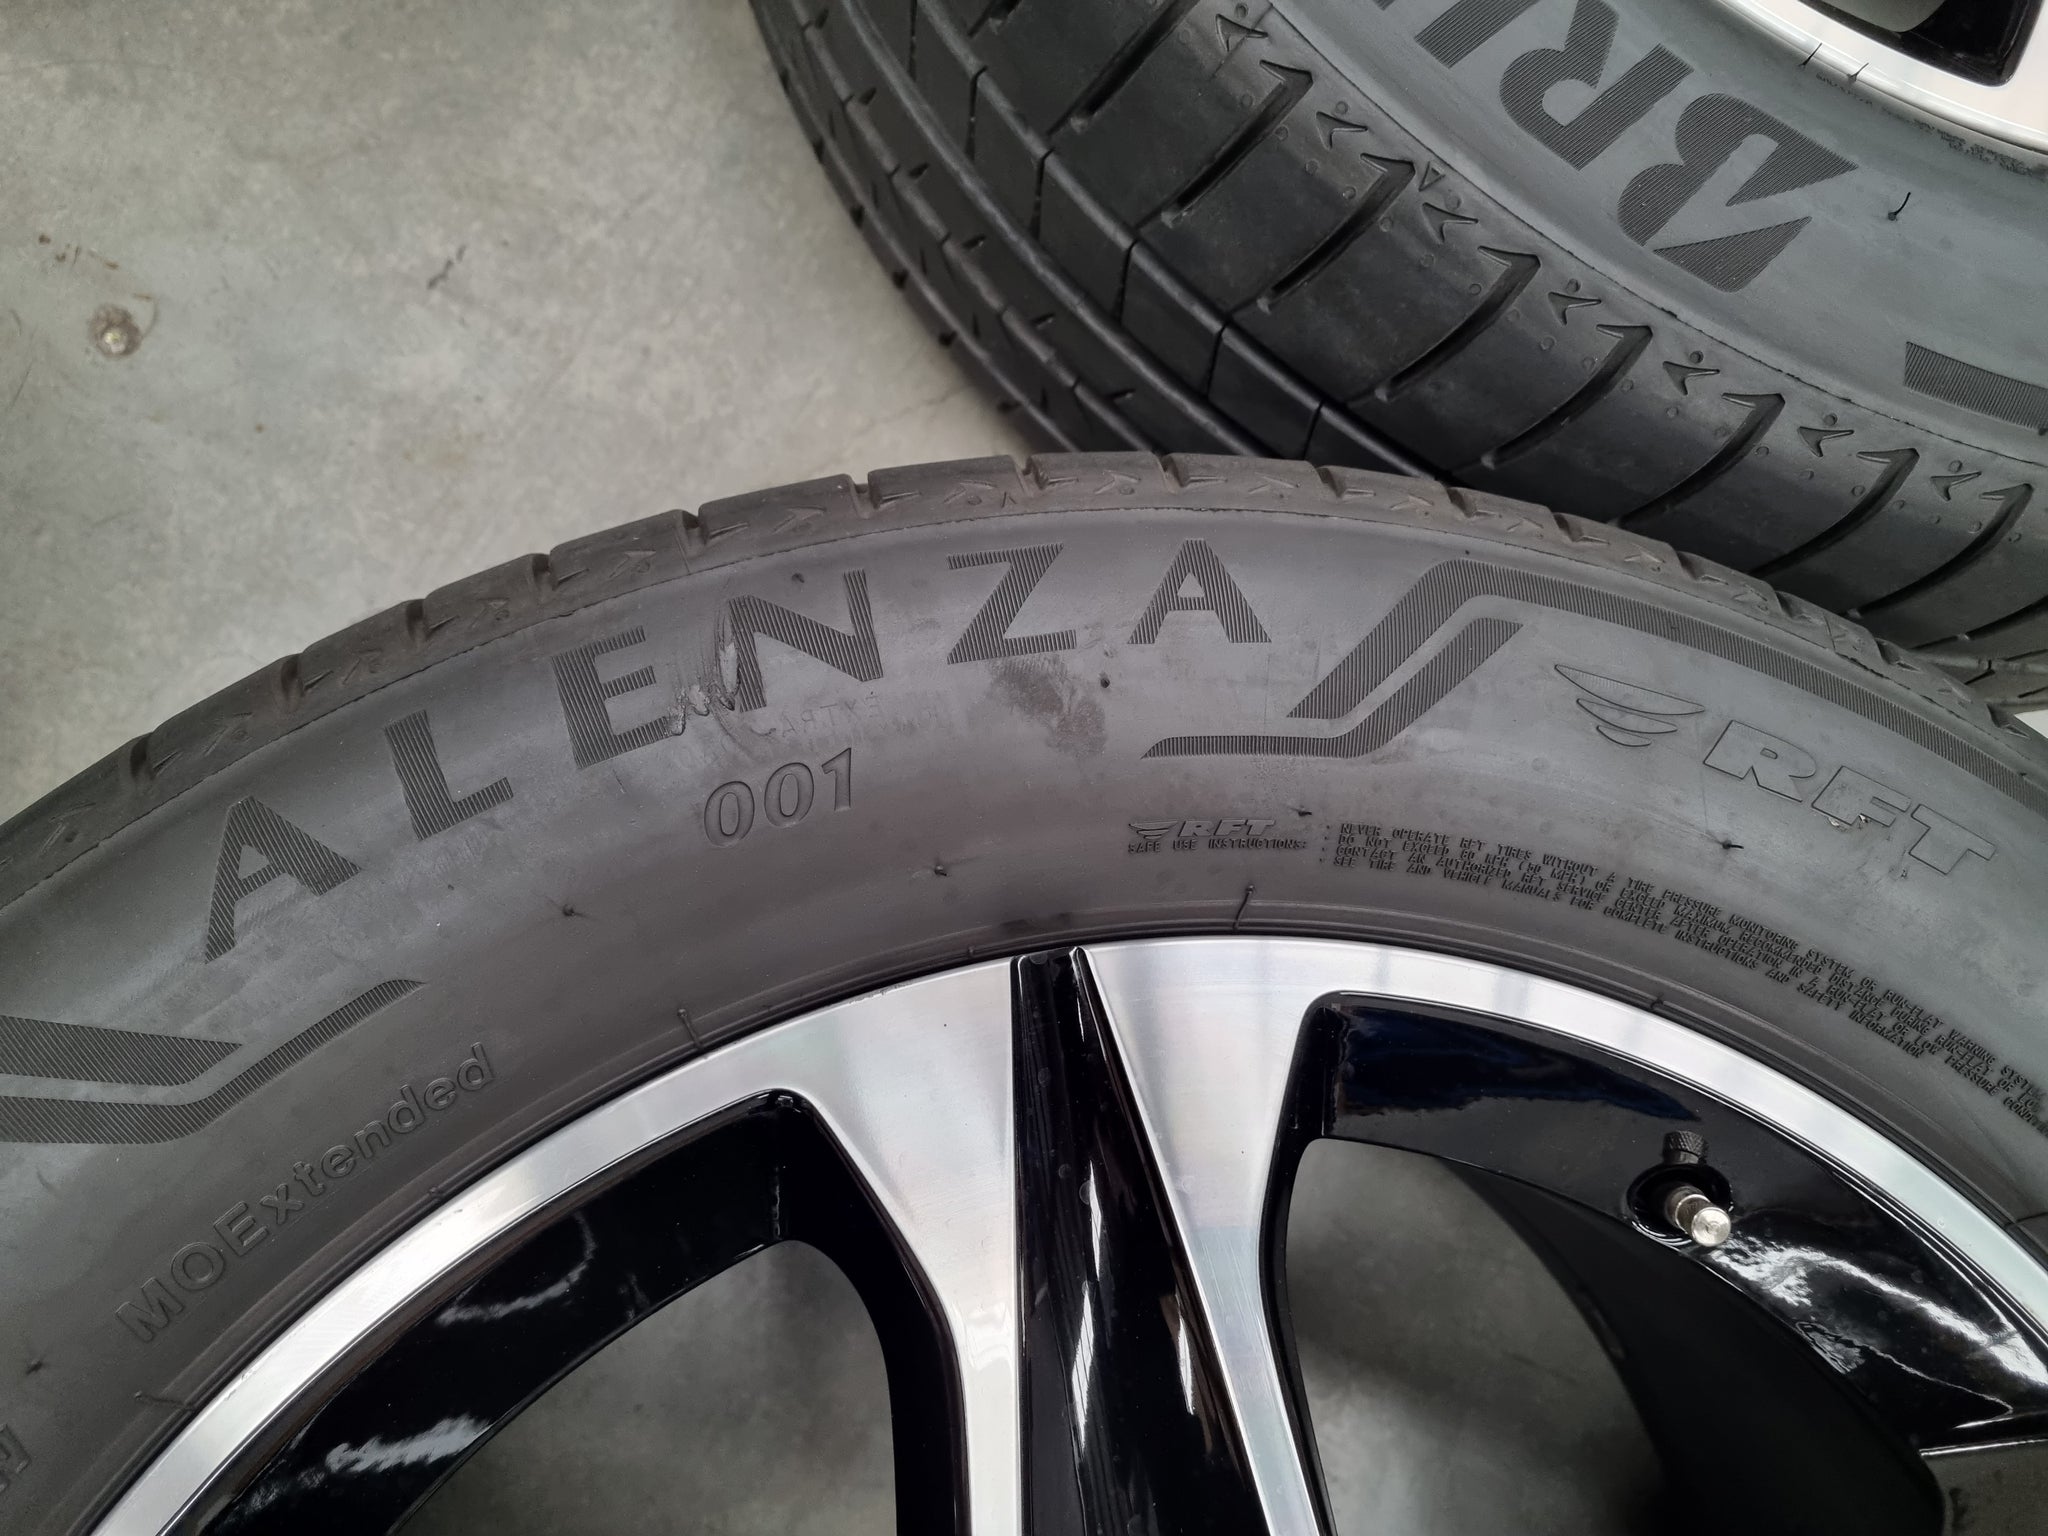 Load image into Gallery viewer, Genuine Mercedes Benz 2020 GLE400 AMG 20 Inch Wheels and Tyres Set of 4
